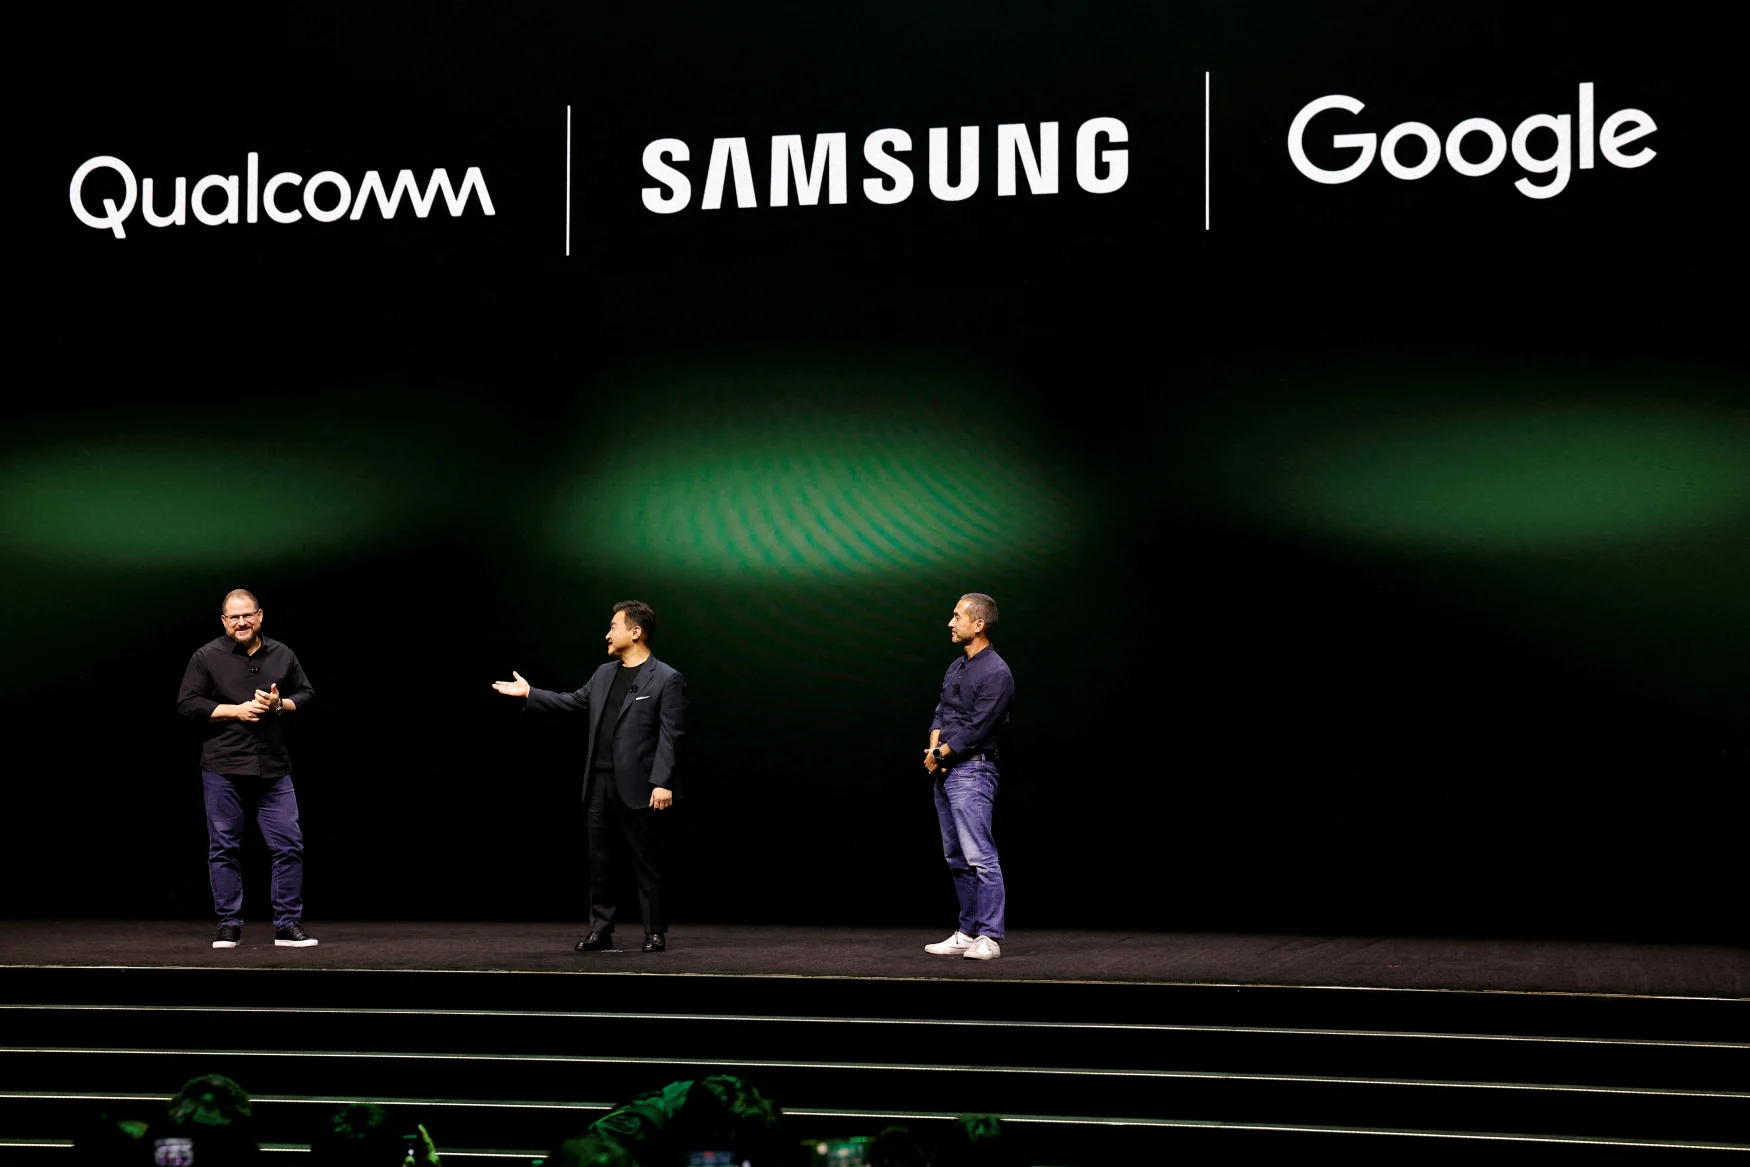 TM Roh, President and Head of Mobile eXperience Business at Samsung Electronics, Cristiano Amon, President & CEO Qualcomm Incorporated, and Hiroshi Lockheimer, SVP, Platforms & Ecosystems at Google, stand on stage as Samsung Electronics unveils its latest flagship smartphones in San Francisco, California, U.S. February 1, 2023. REUTERS/Peter DaSilva REFILE - CORRECTING ID